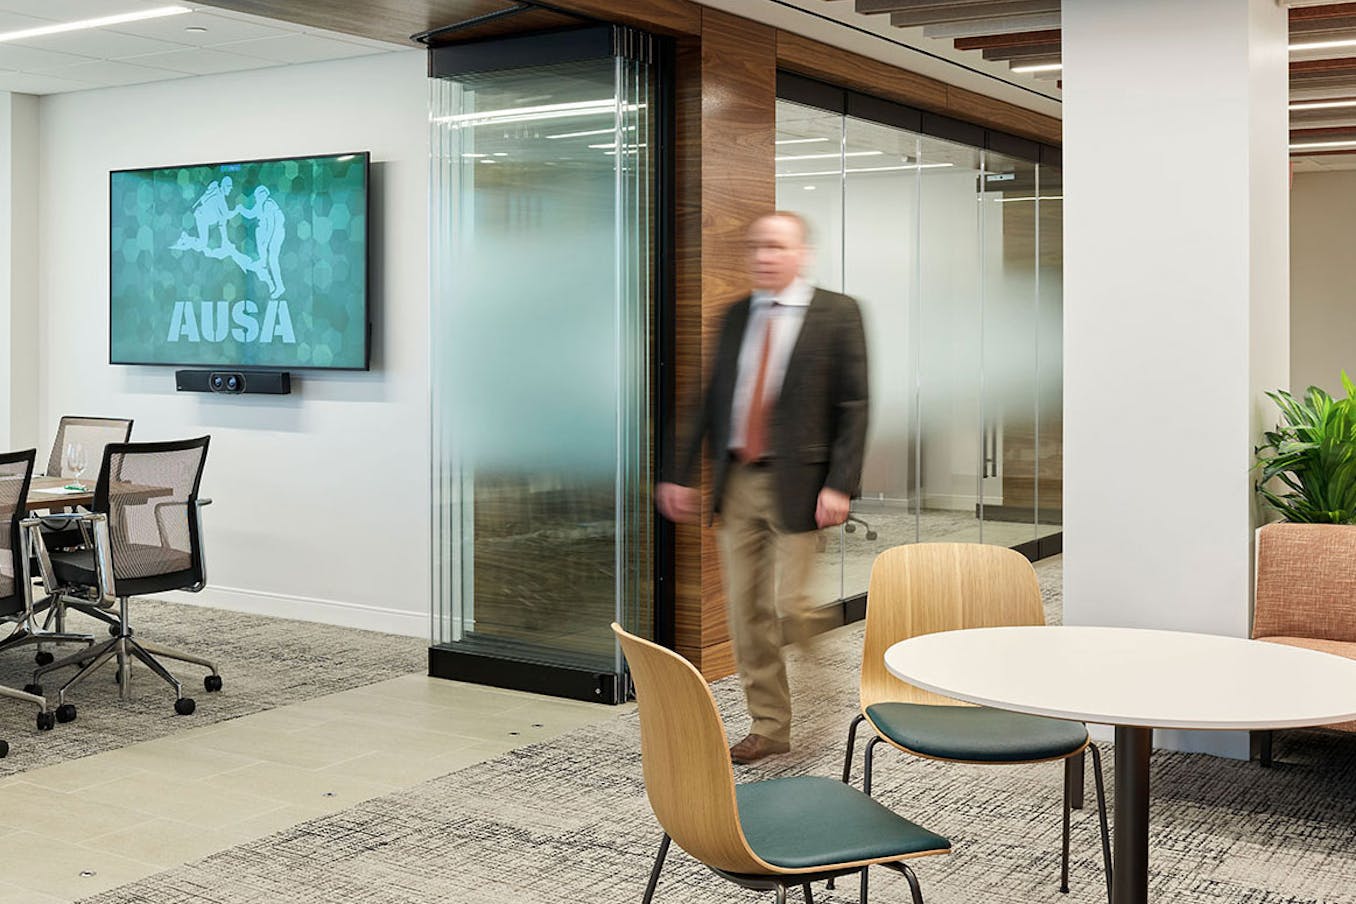 A man walks through an office conference room with frameless glass partitions